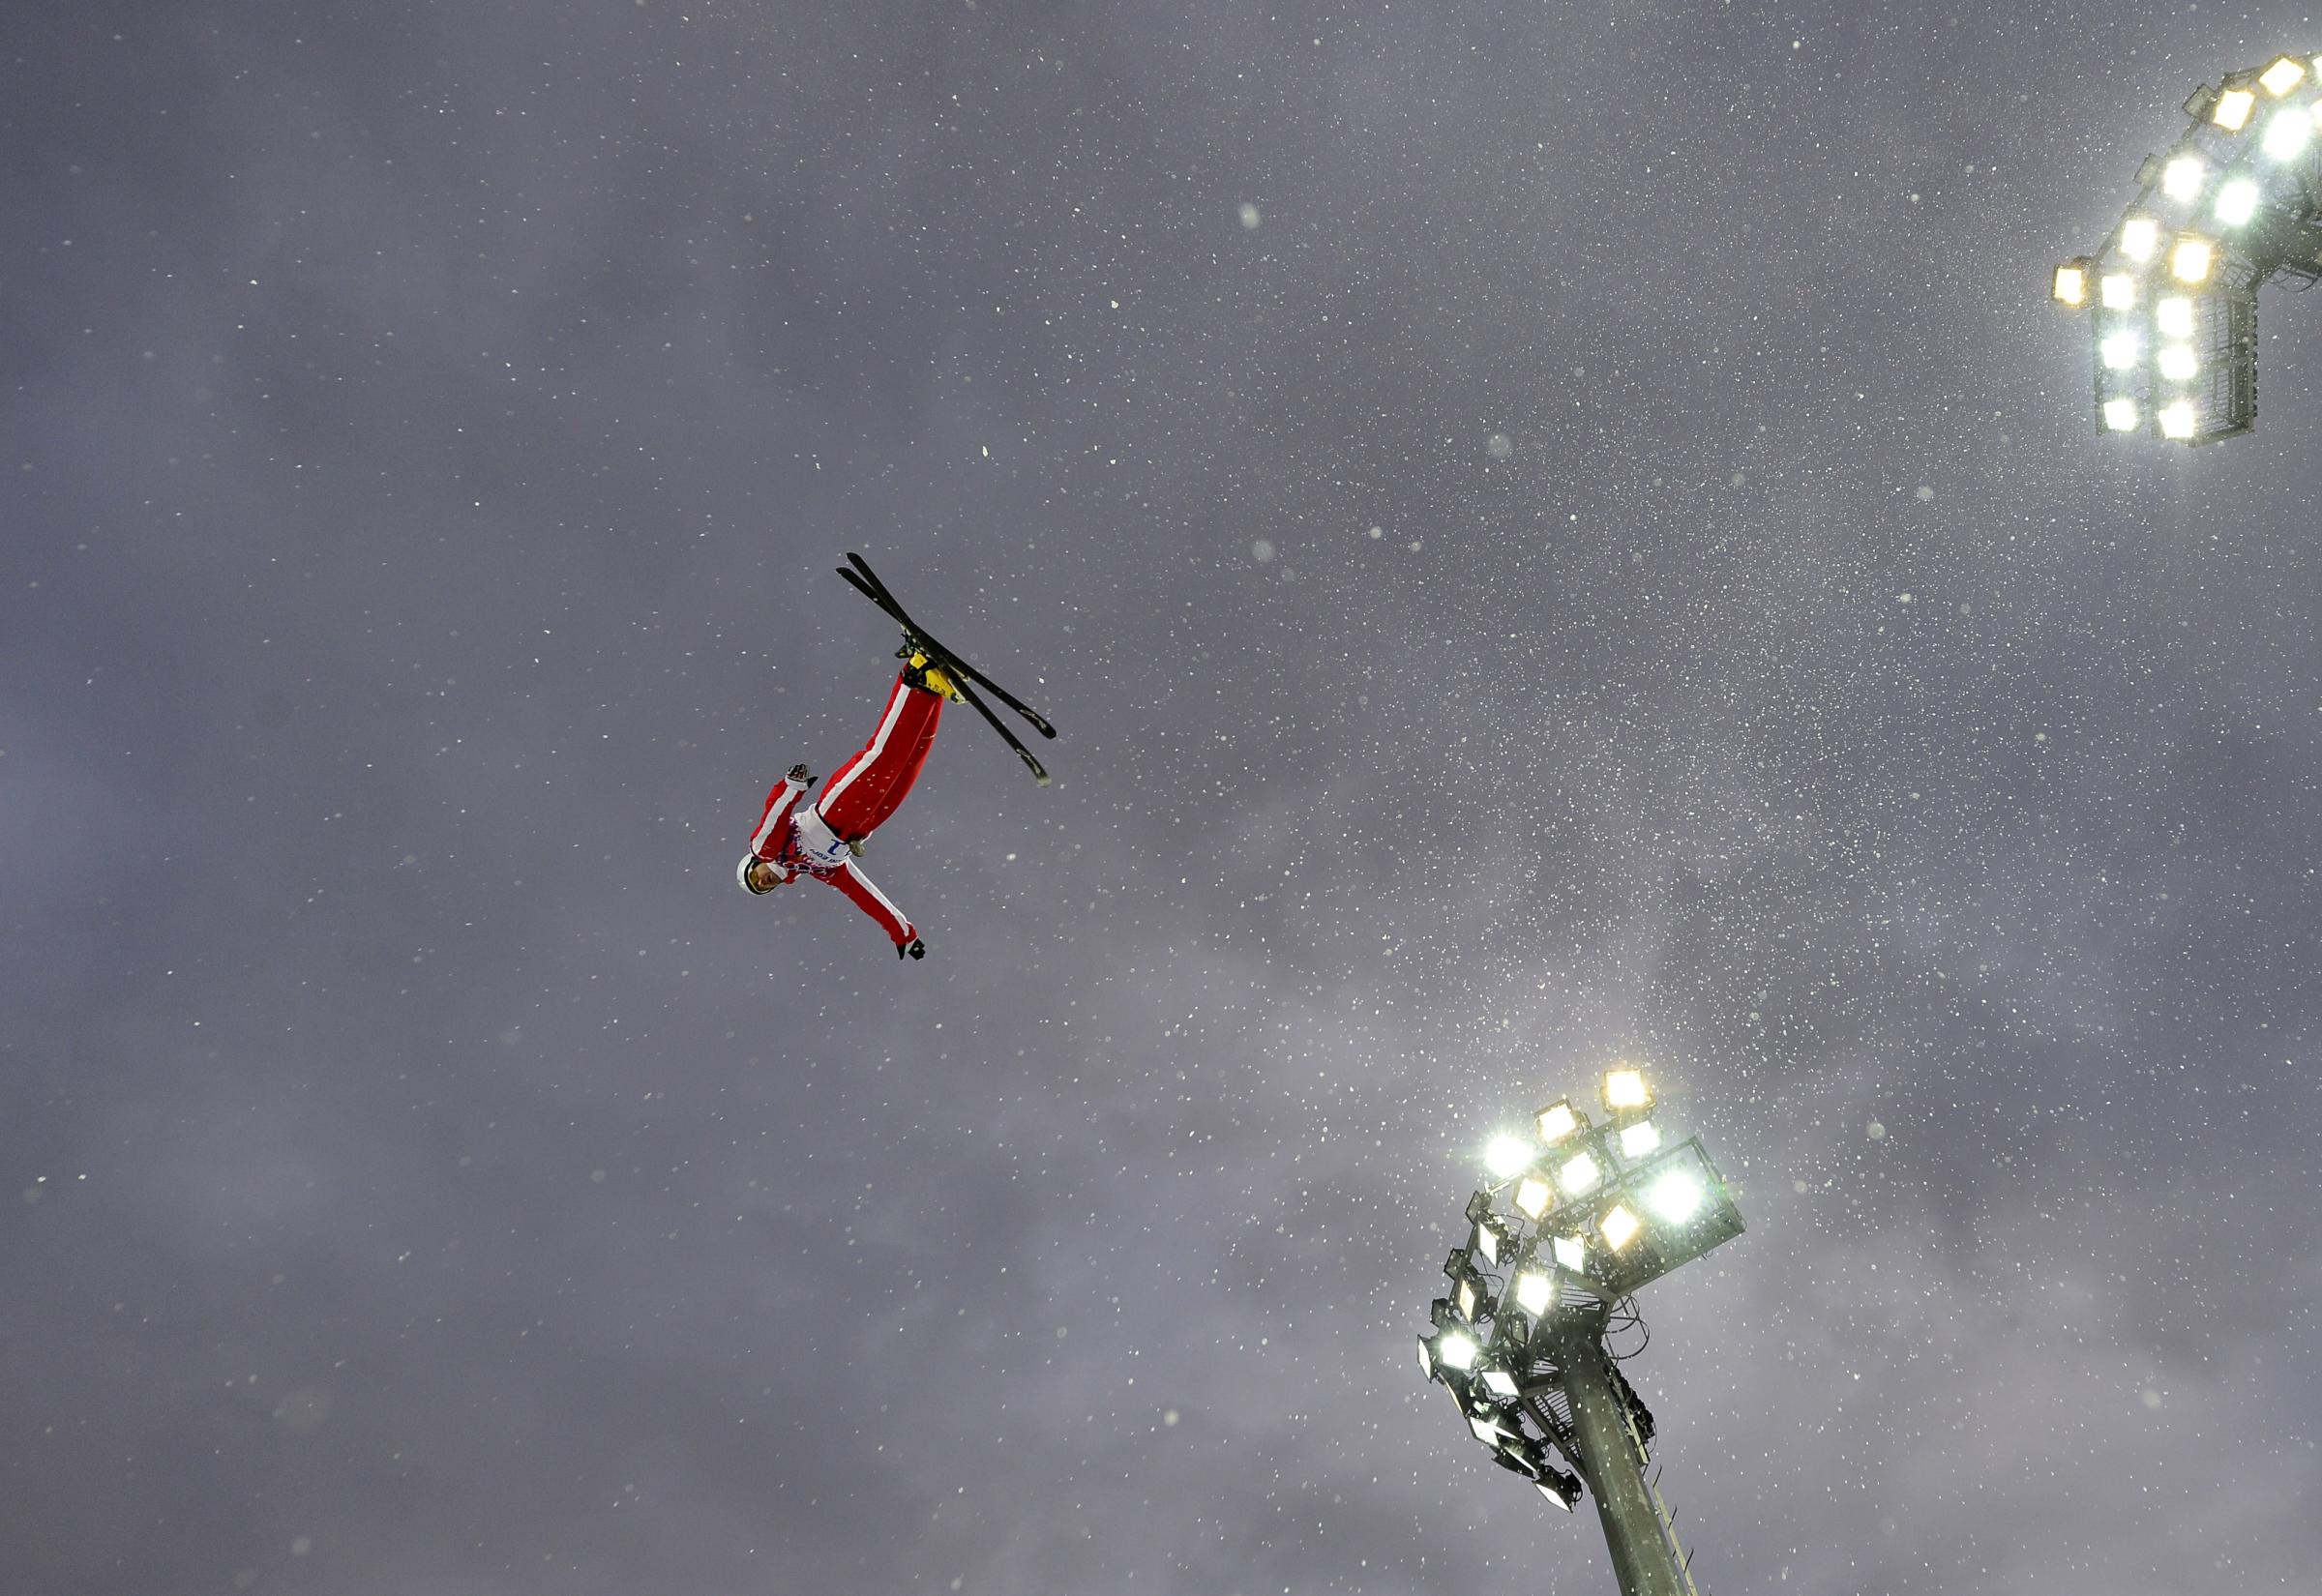 Switzerland's Renato Ulrich competes in the Men's Freestyle Skiing Aerials qualifications.